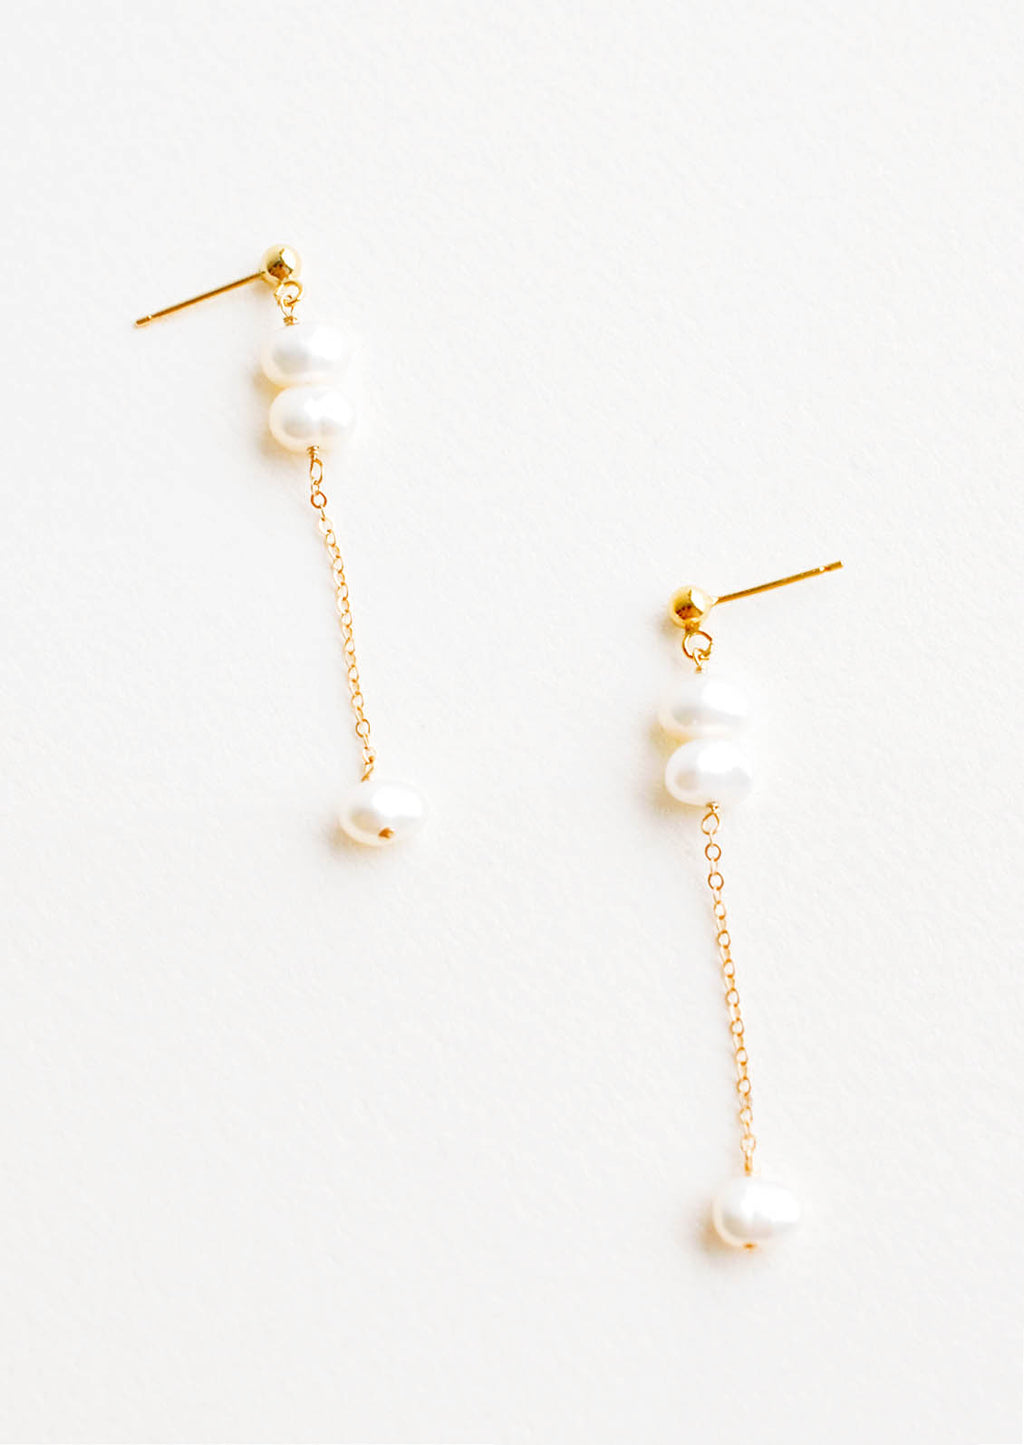 1: A pair of gold earrings with three pearls dangling from a post, and the third pearl is hanging from a fine gold chain.